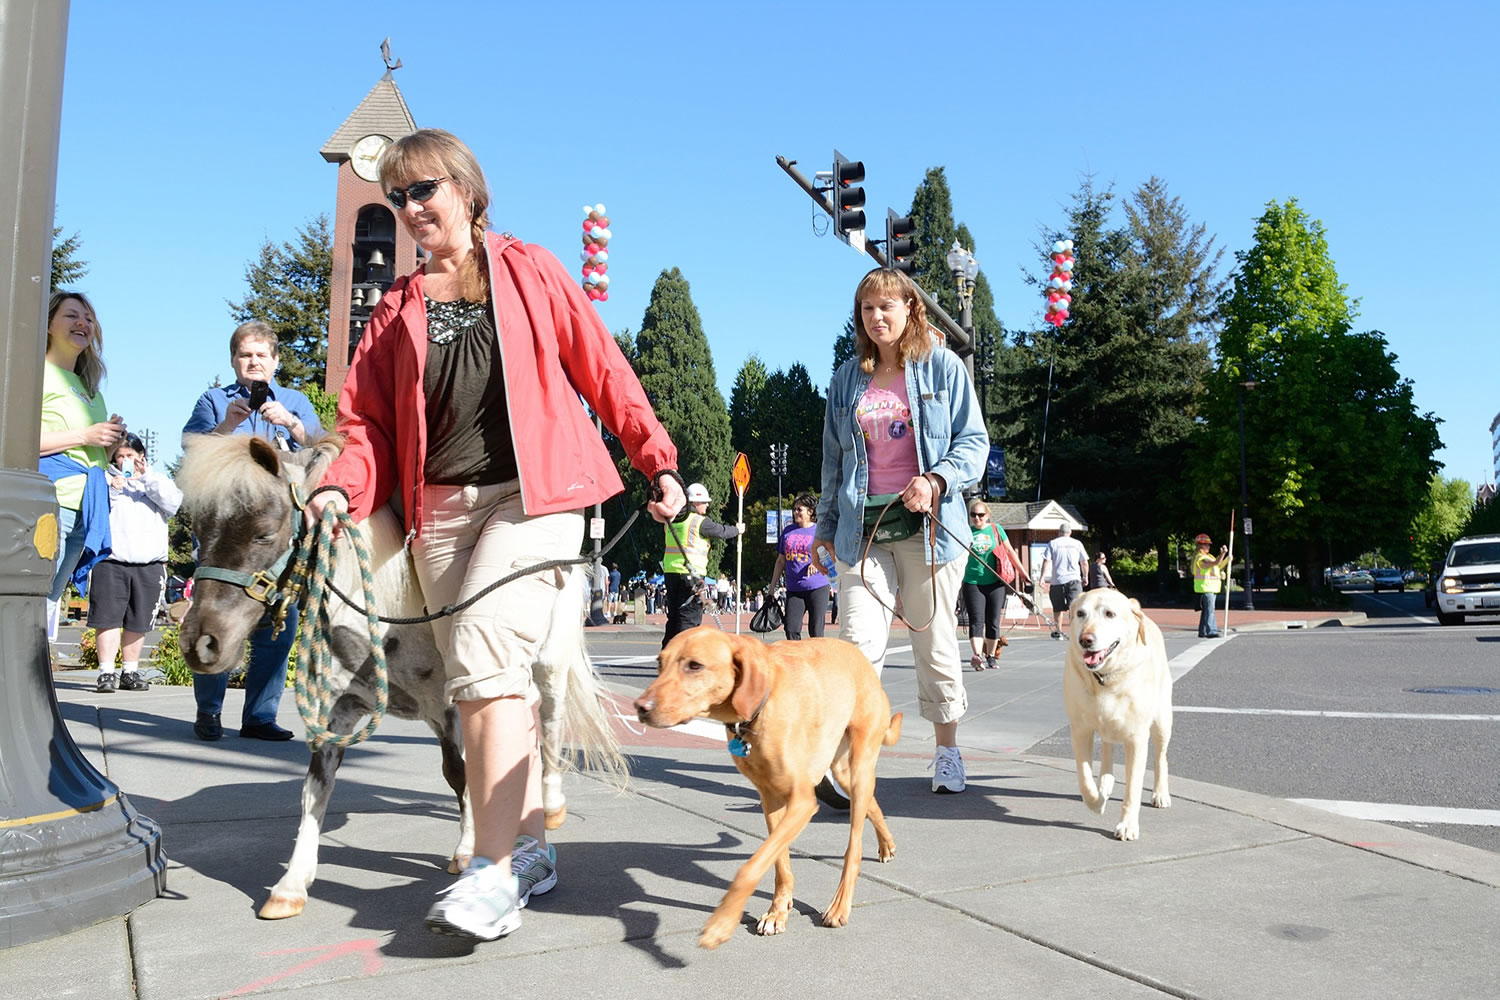 Walk Run for the Animals, benefiting the Humane Society for Southwest Washington, is May 2 in downtown Vancouver.